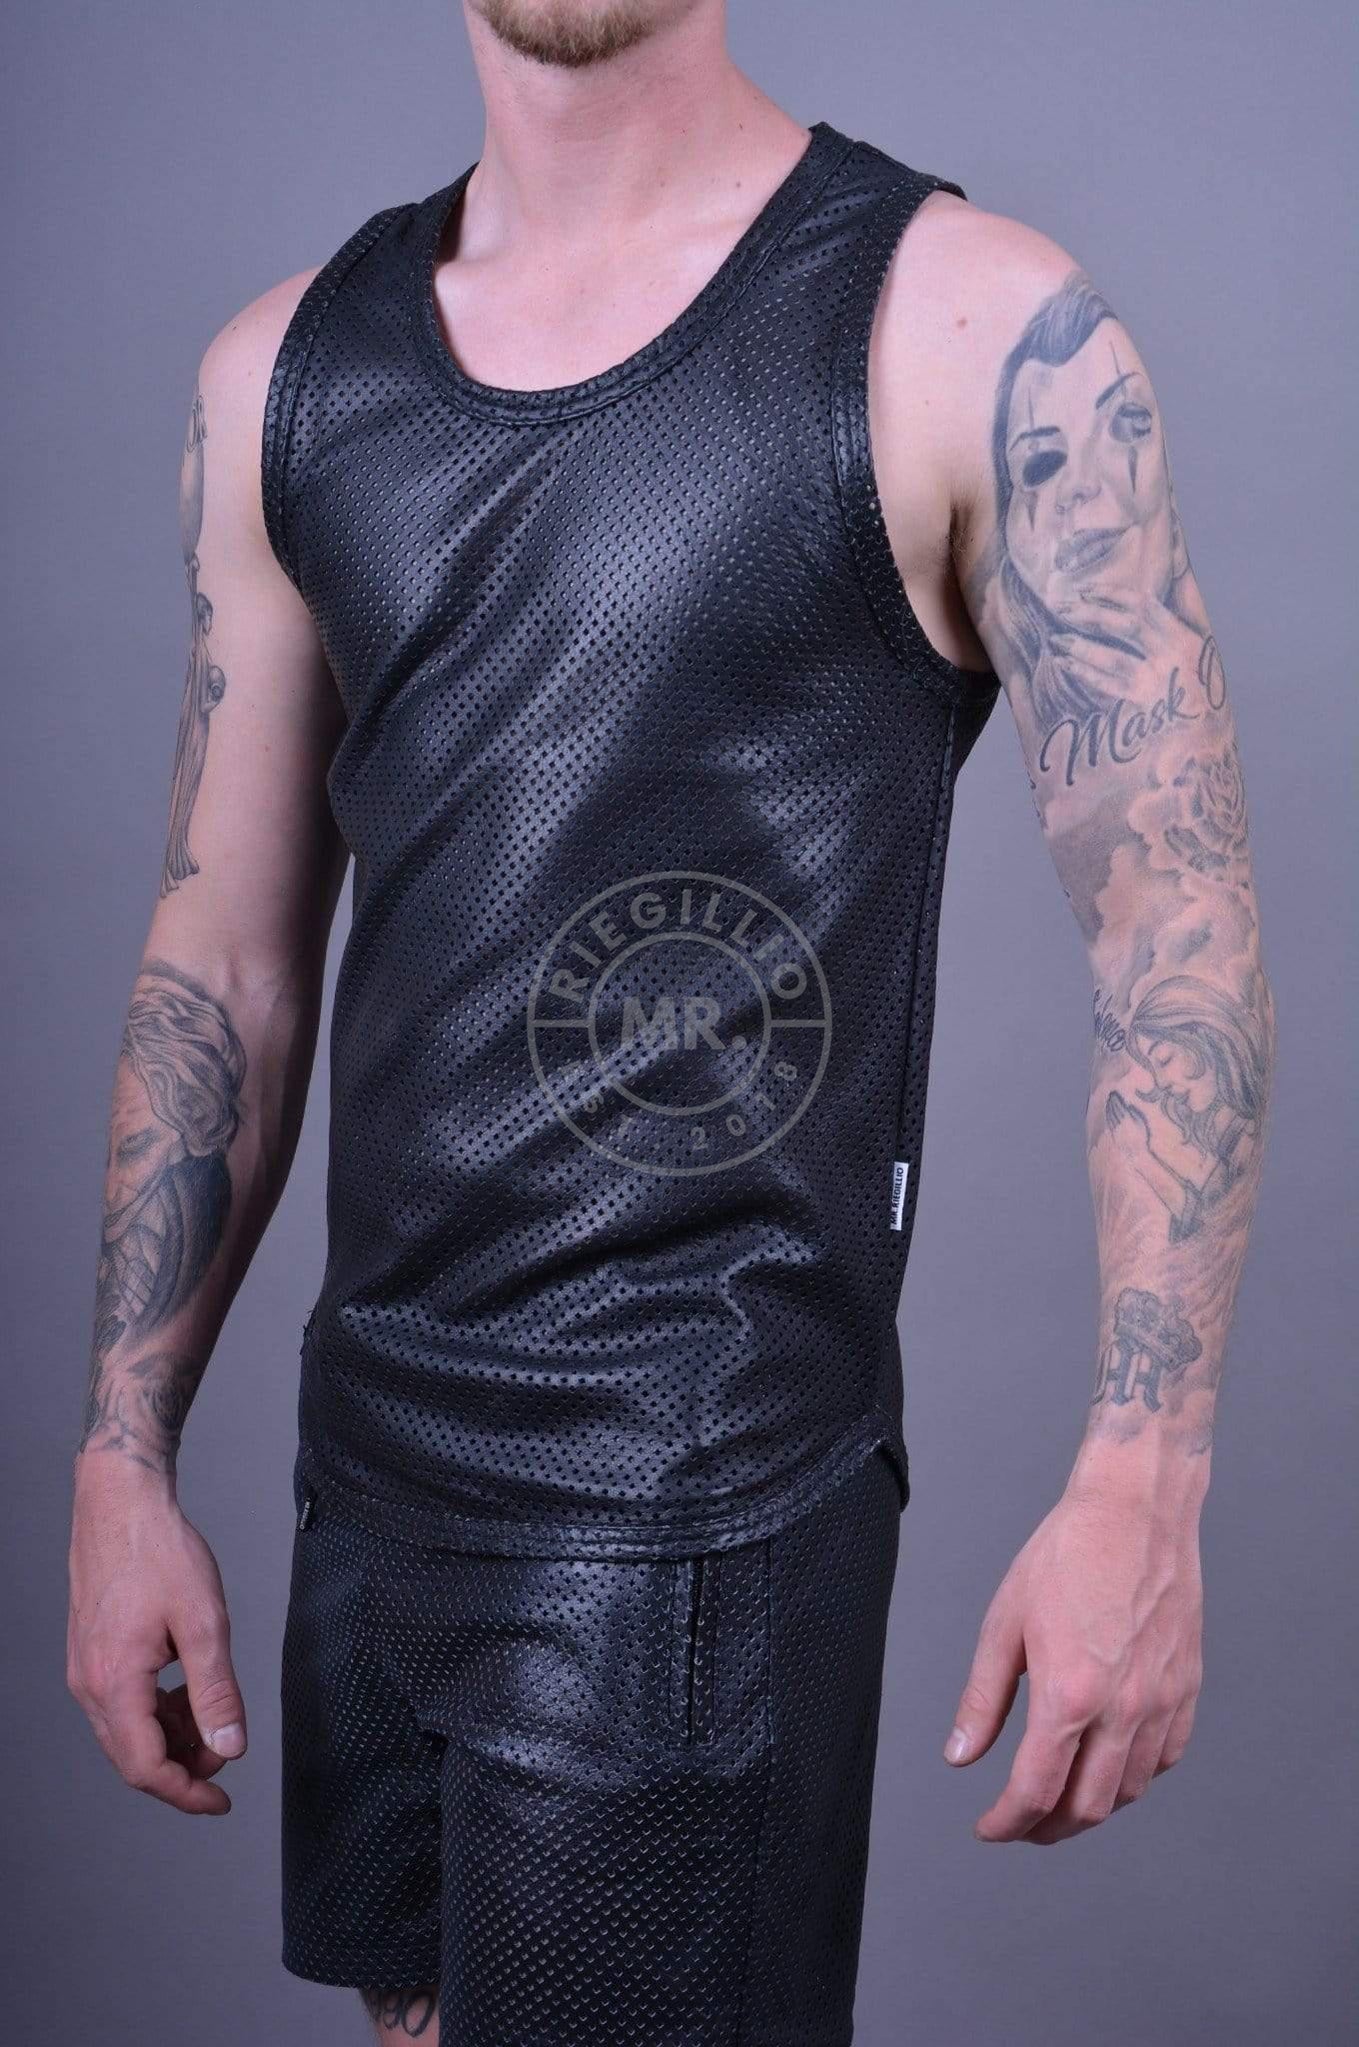 Perforated Leather Tank Top at MR. Riegillio